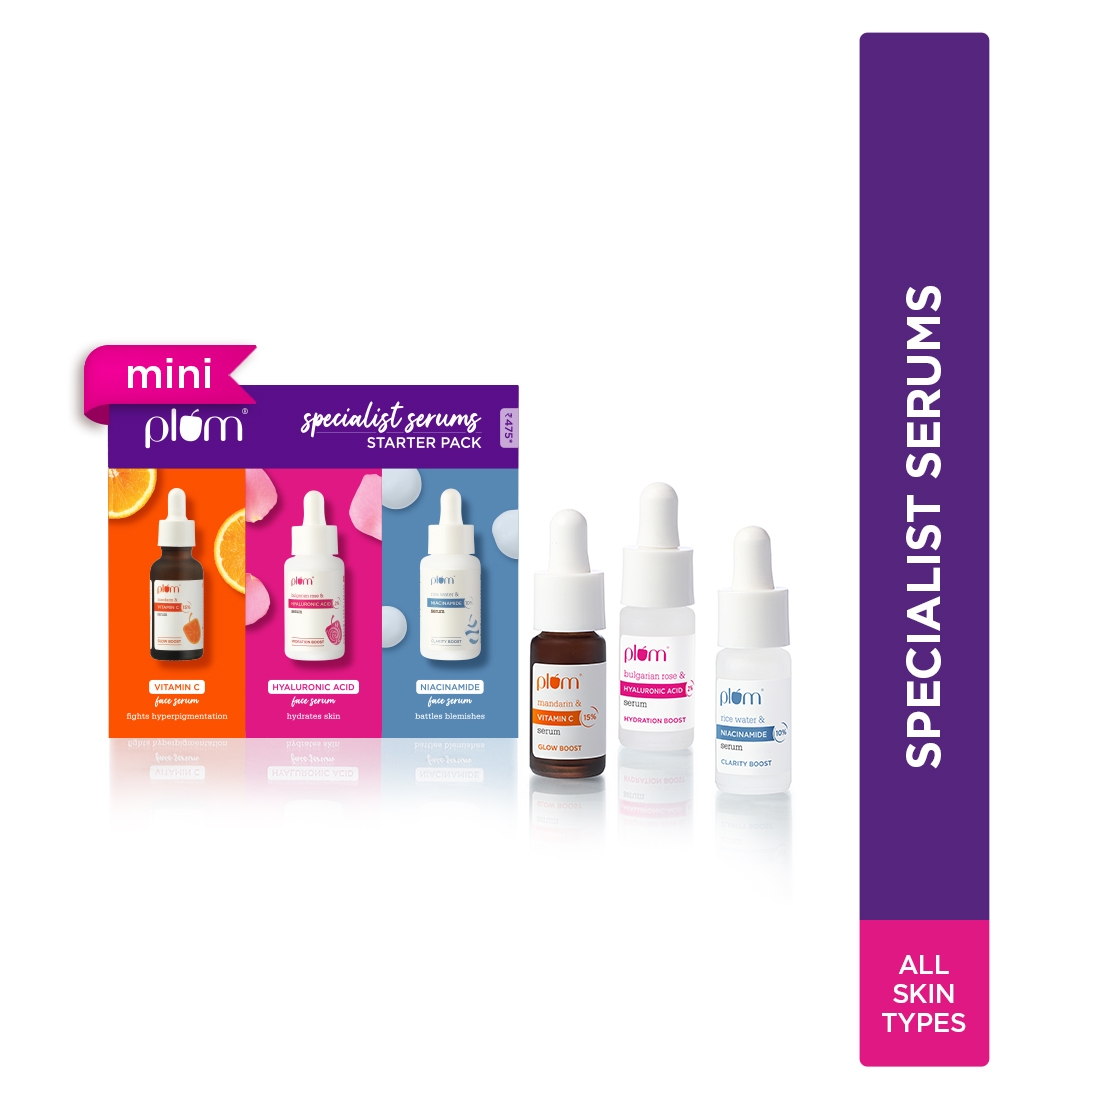 plum | Specialist Serums - Starter Pack | Set of 5 Mini Serums |For Glowing, Hydrated, Clear, Smooth & Even-toned Skin